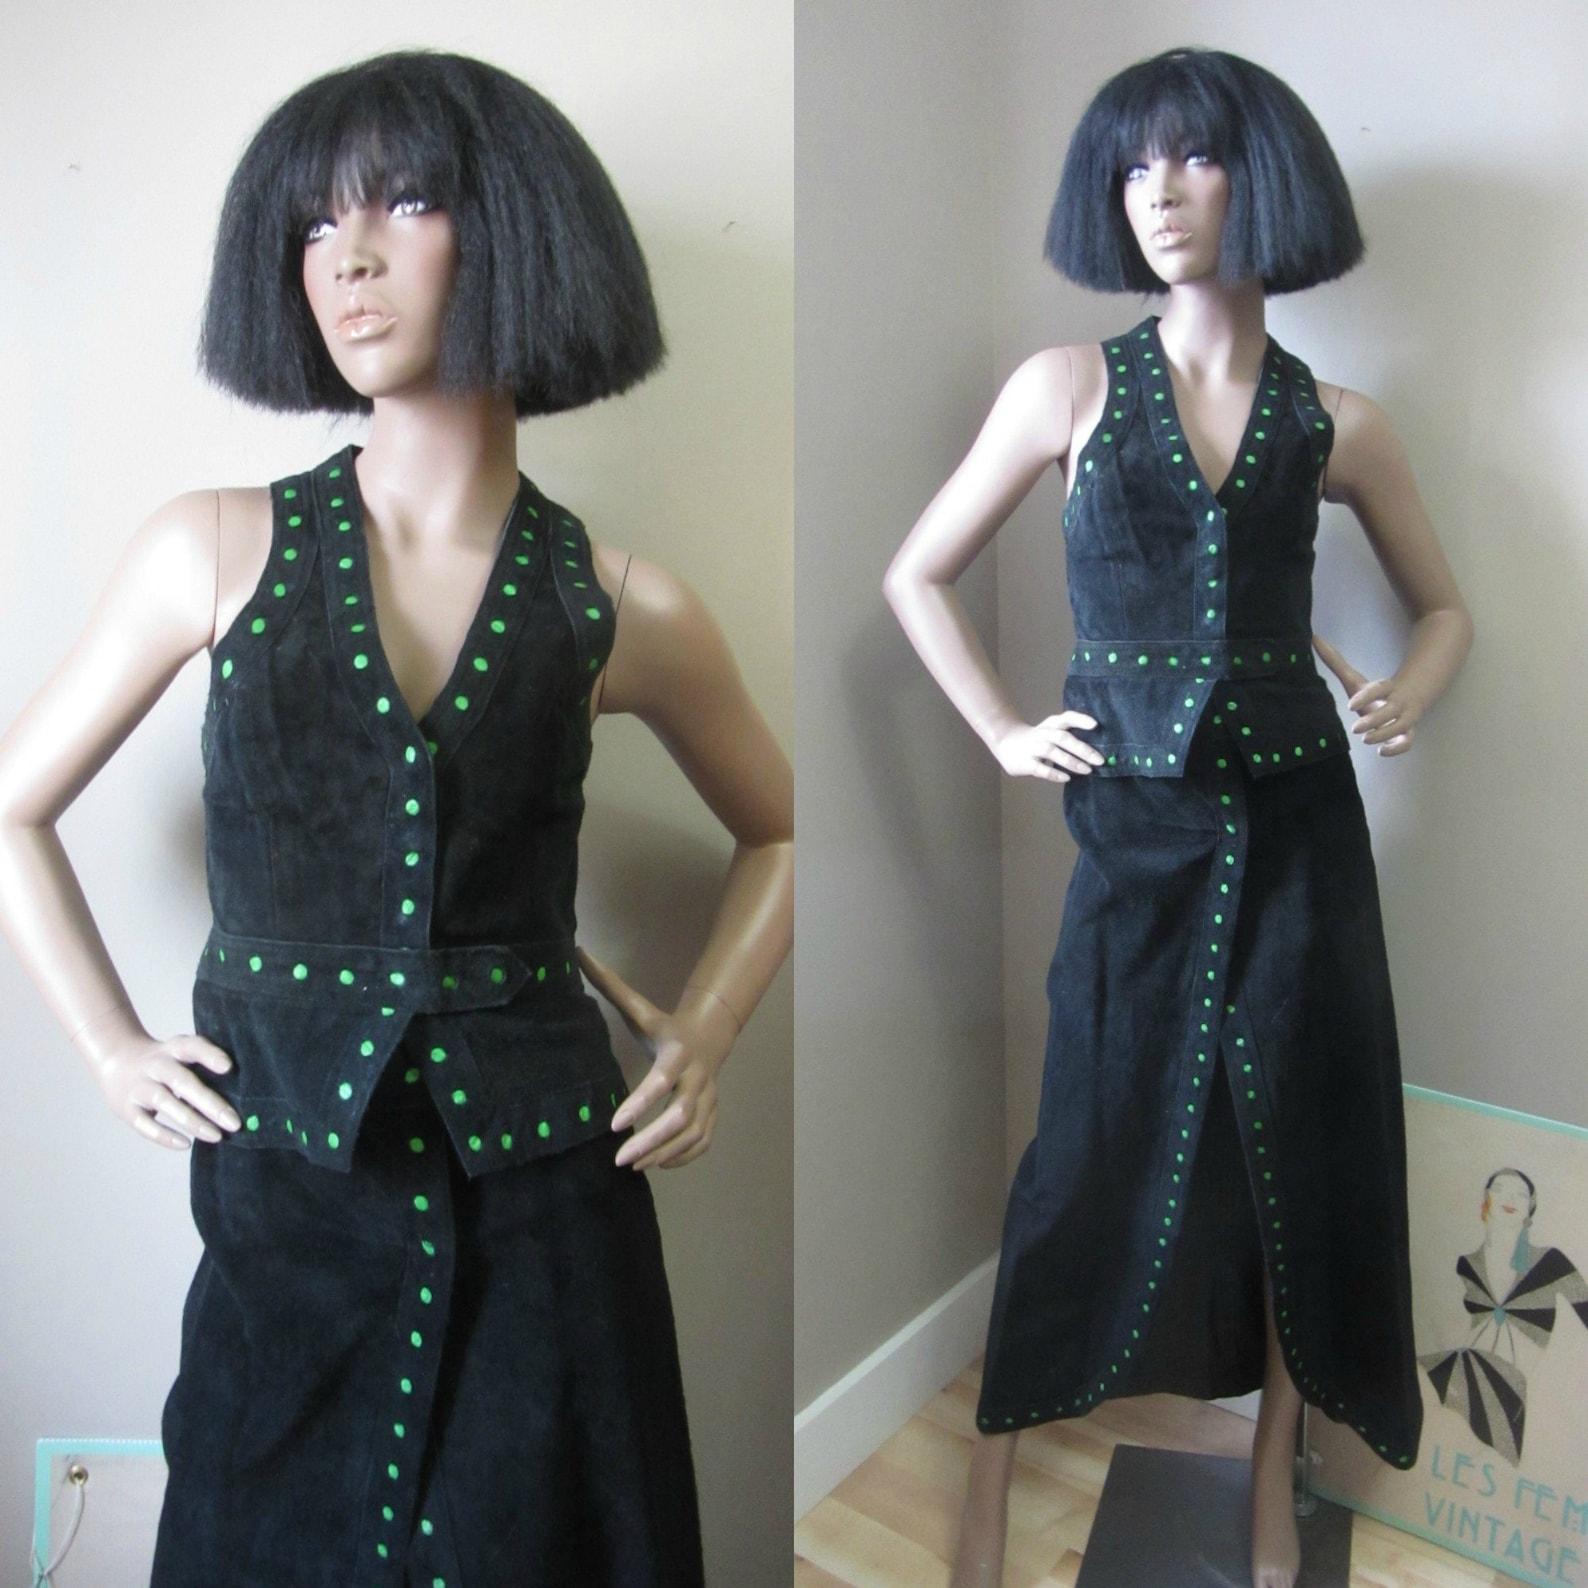 1970s two piece vest and skirt set.
Midnight blue suede & interior leather. Circle cut outs with electric green leather 